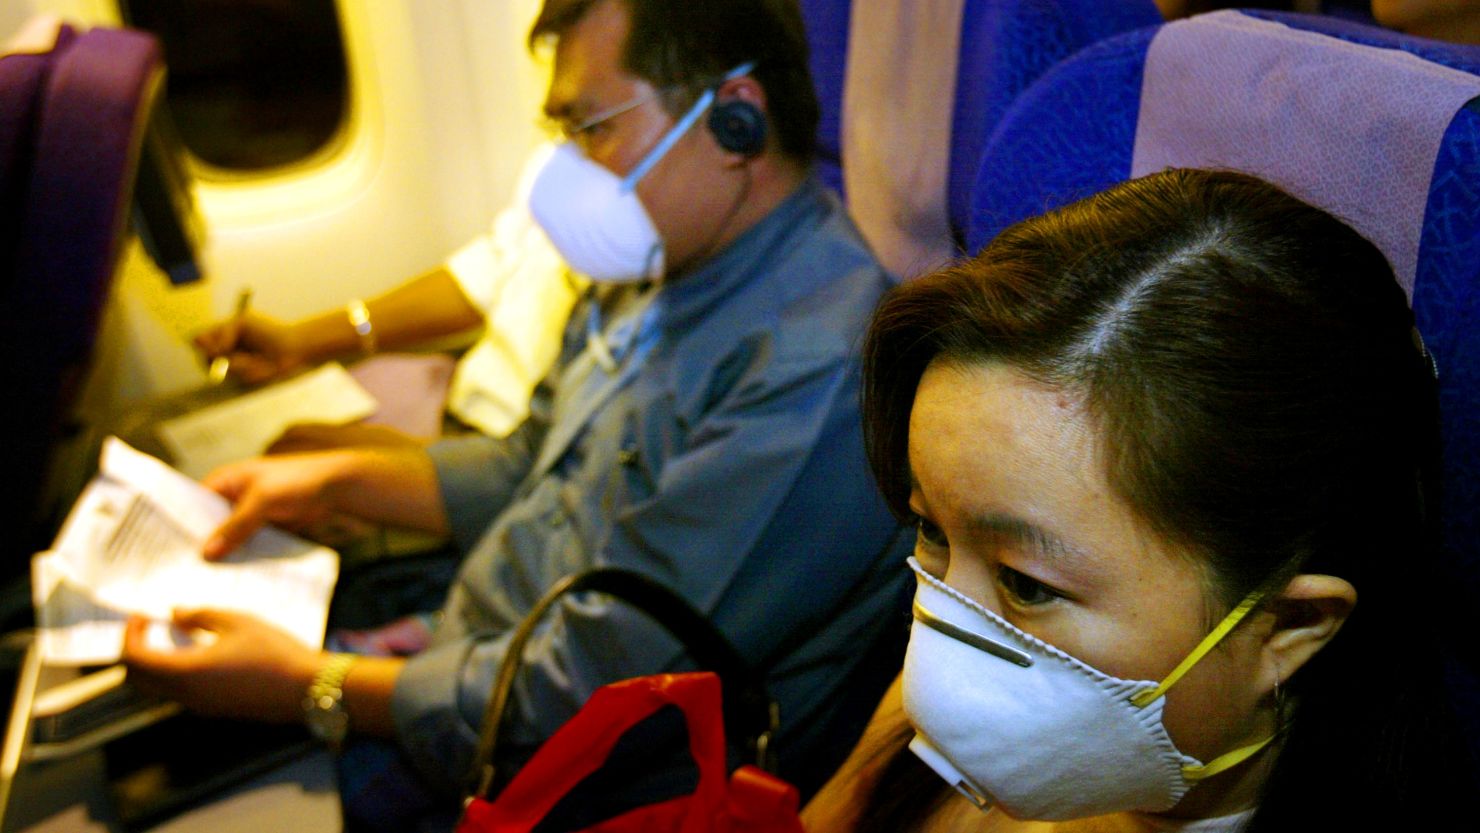 Passengers wear masks during the SARS outbreak in 2003.